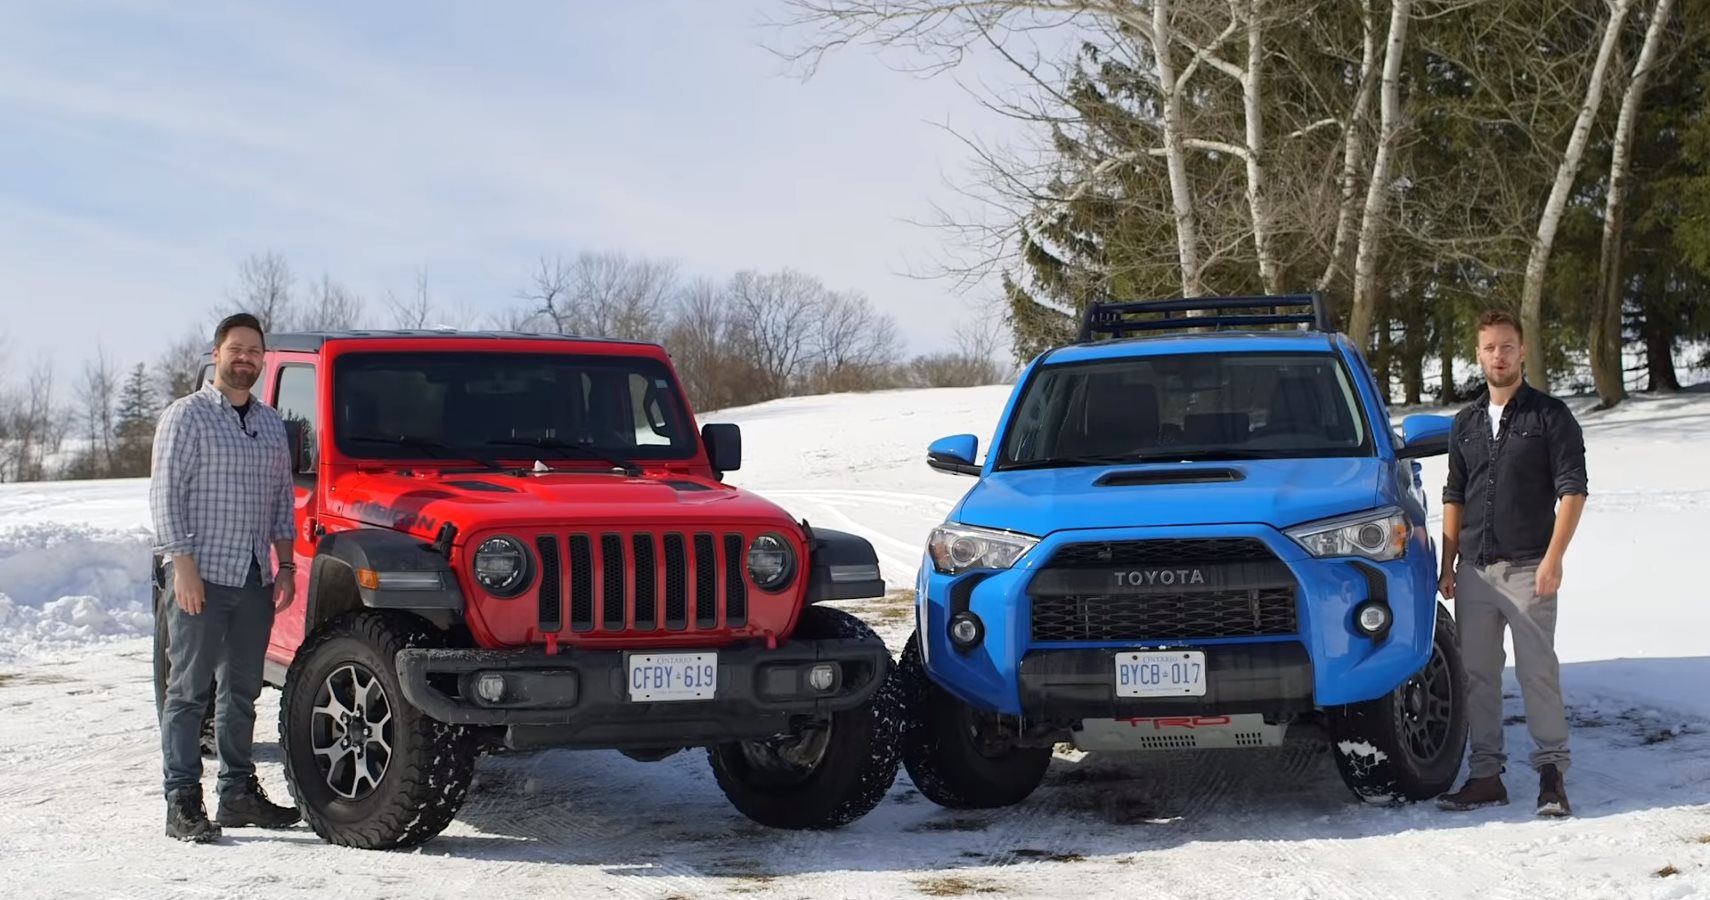 Which Off-Roader Wins: The Jeep Rubicon Or The Toyota 4Runner TRD PRO? [VIDEO]